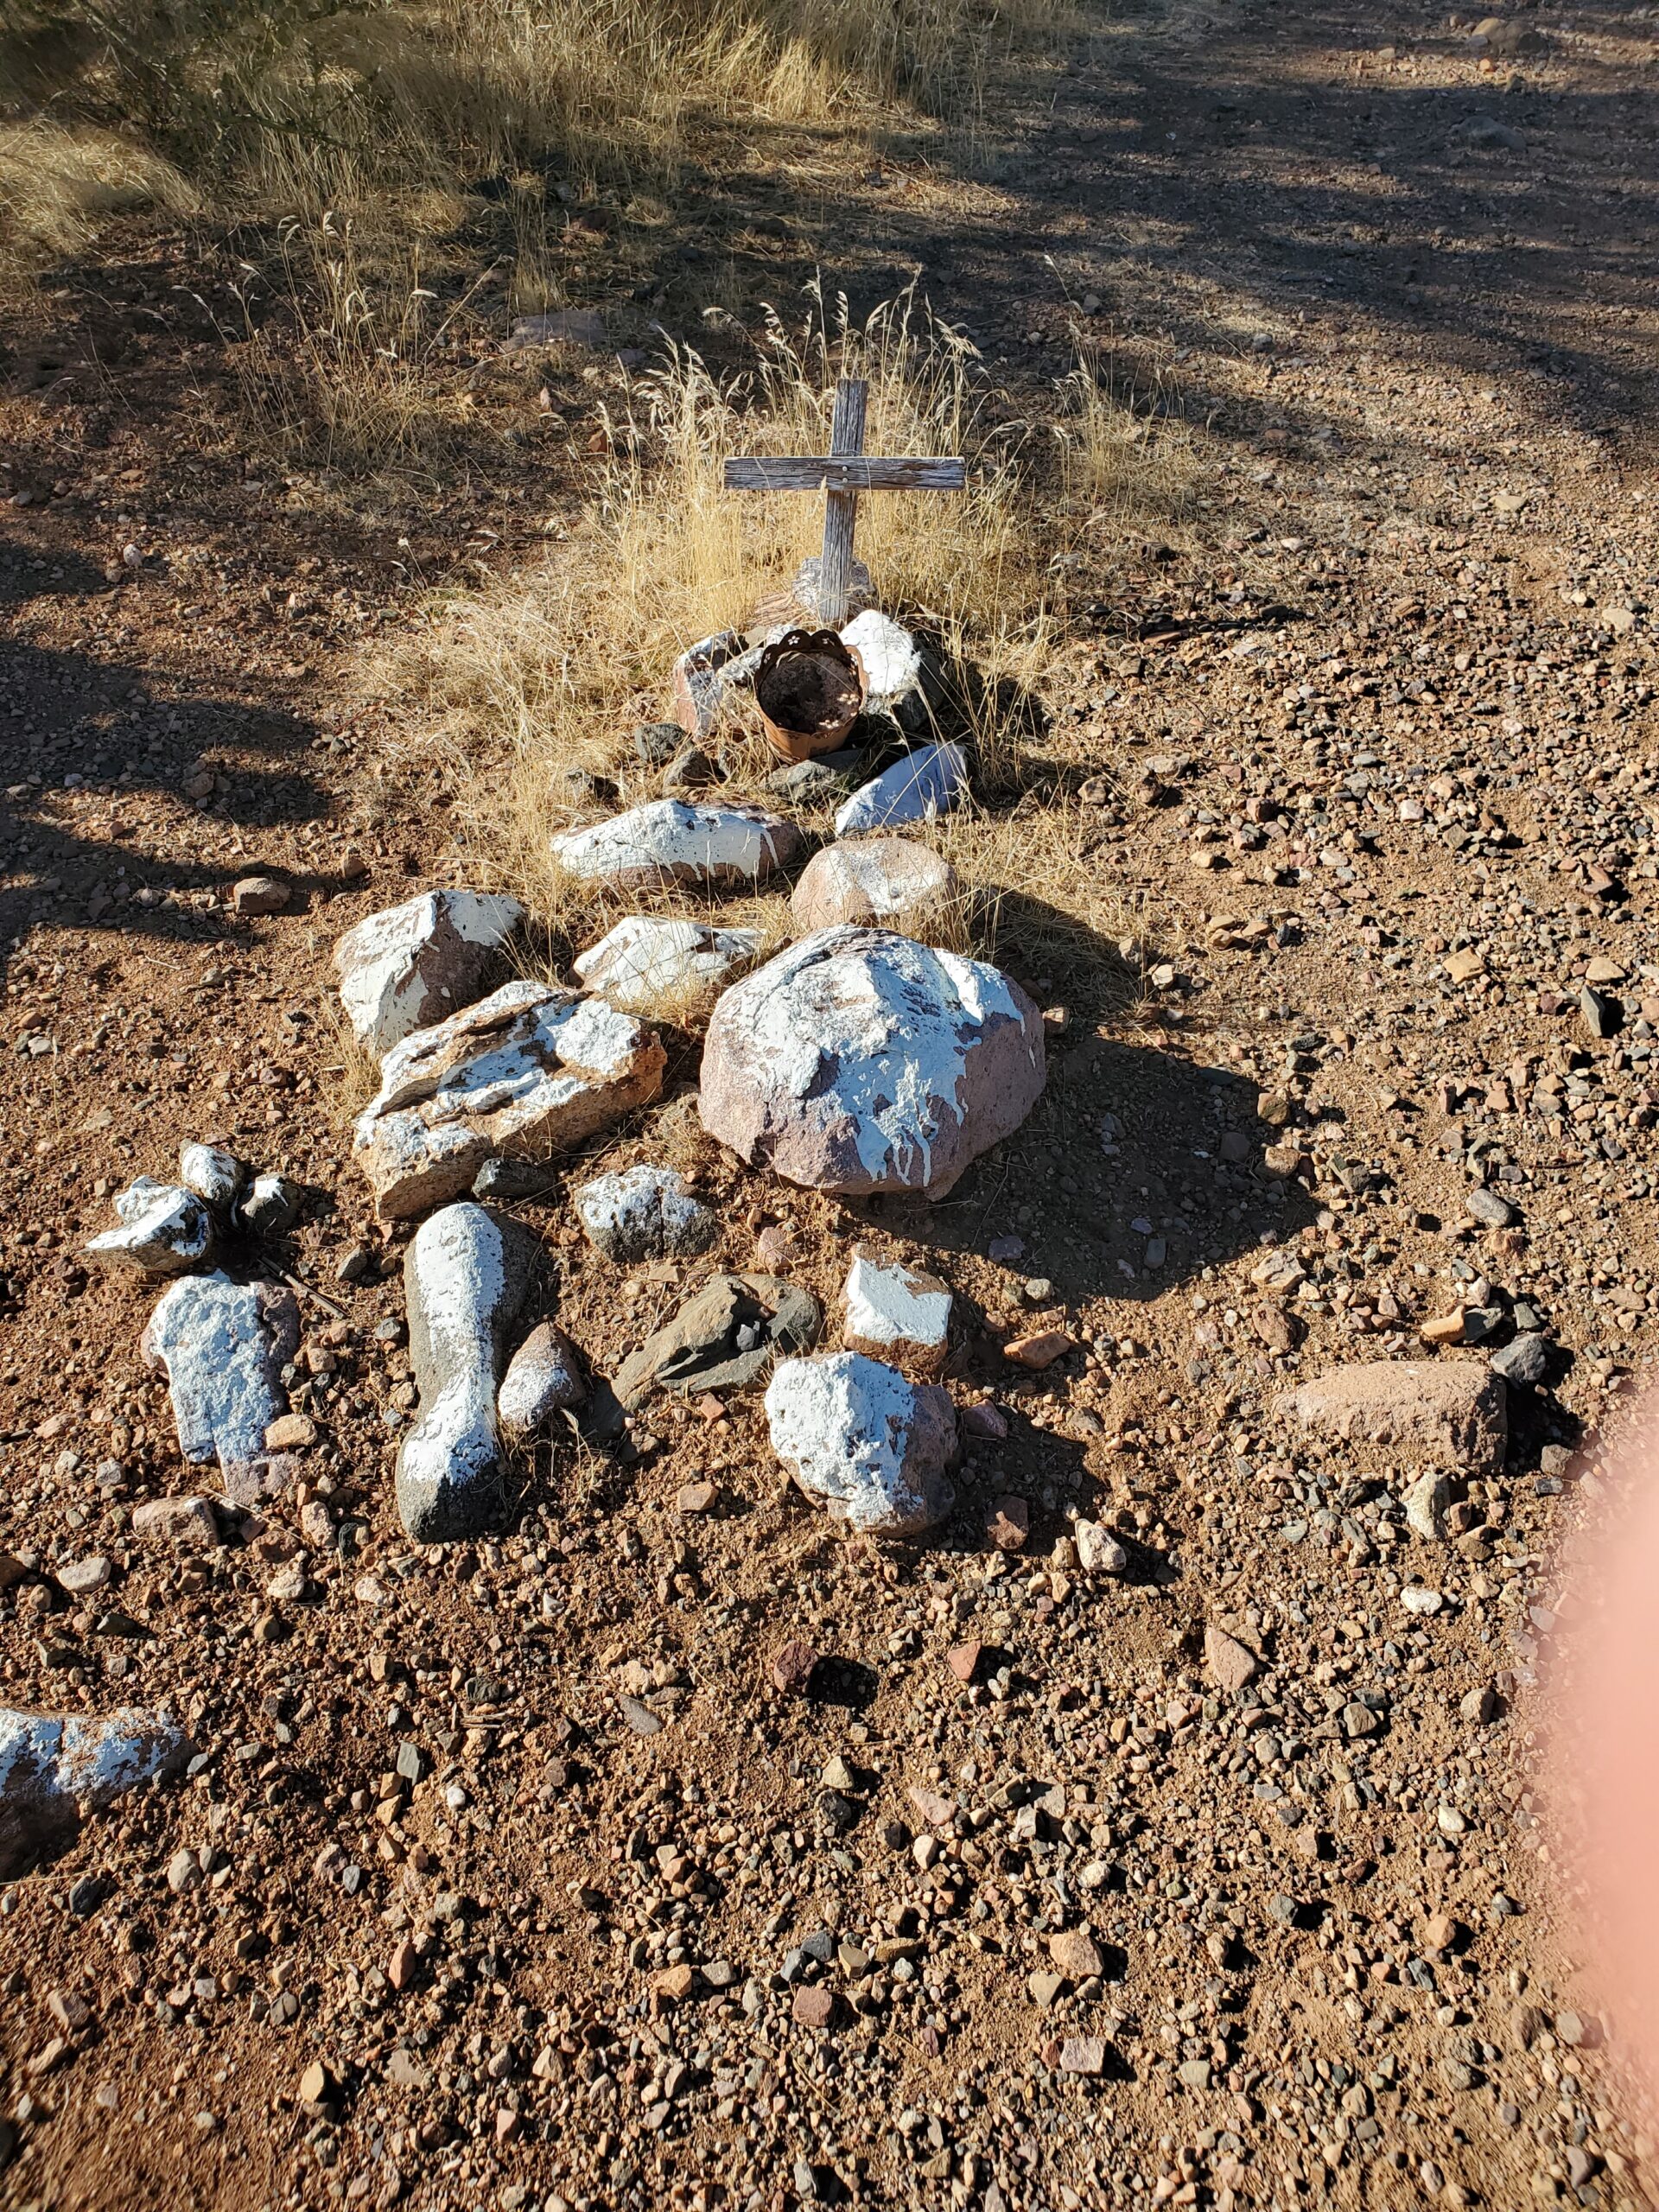 Marked with a cross, Historic Pinal